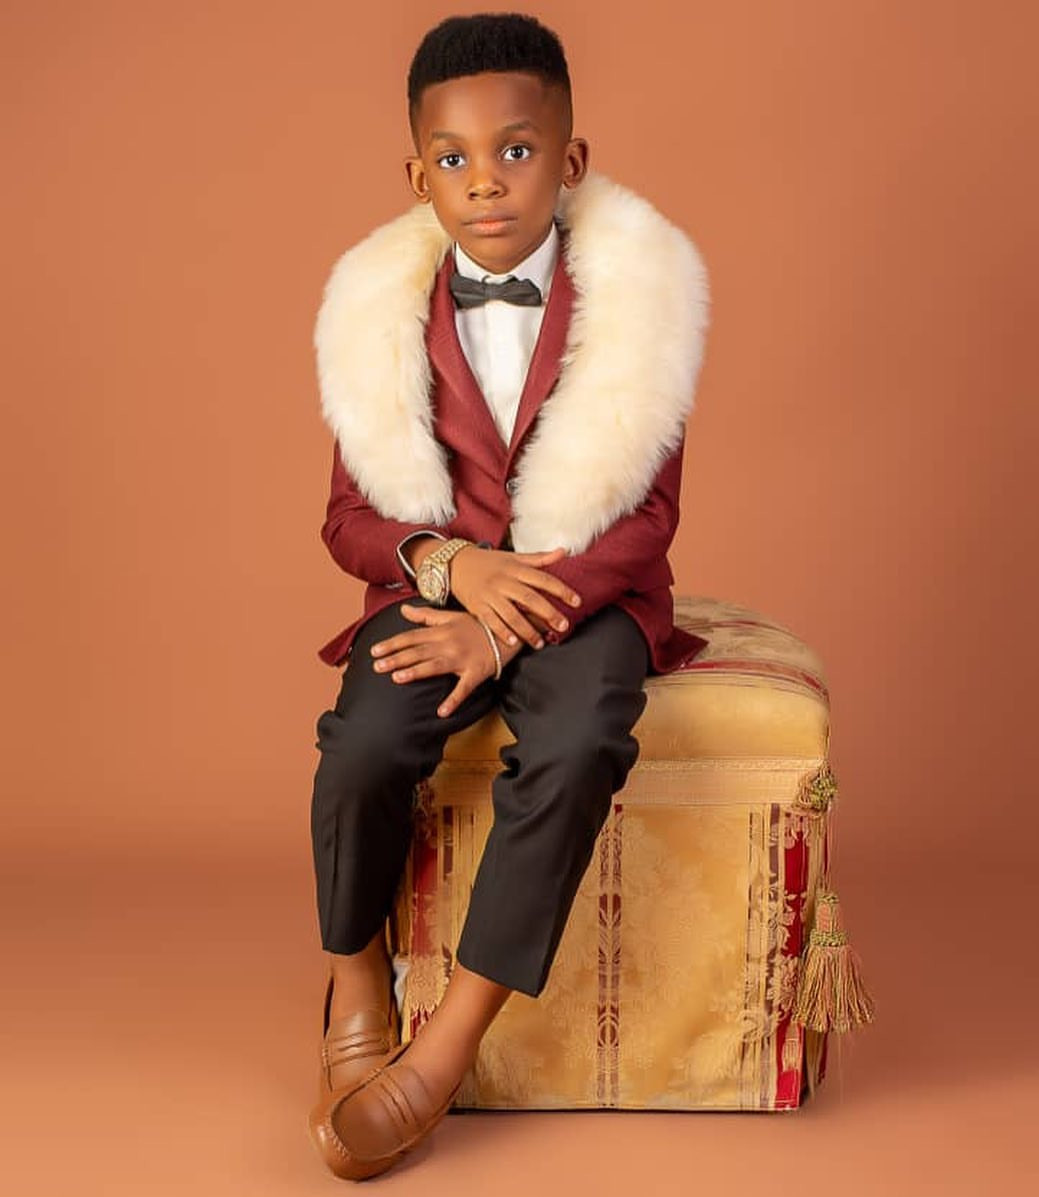 KCee shows off his family as he celebrates his birthday with lovely new photos